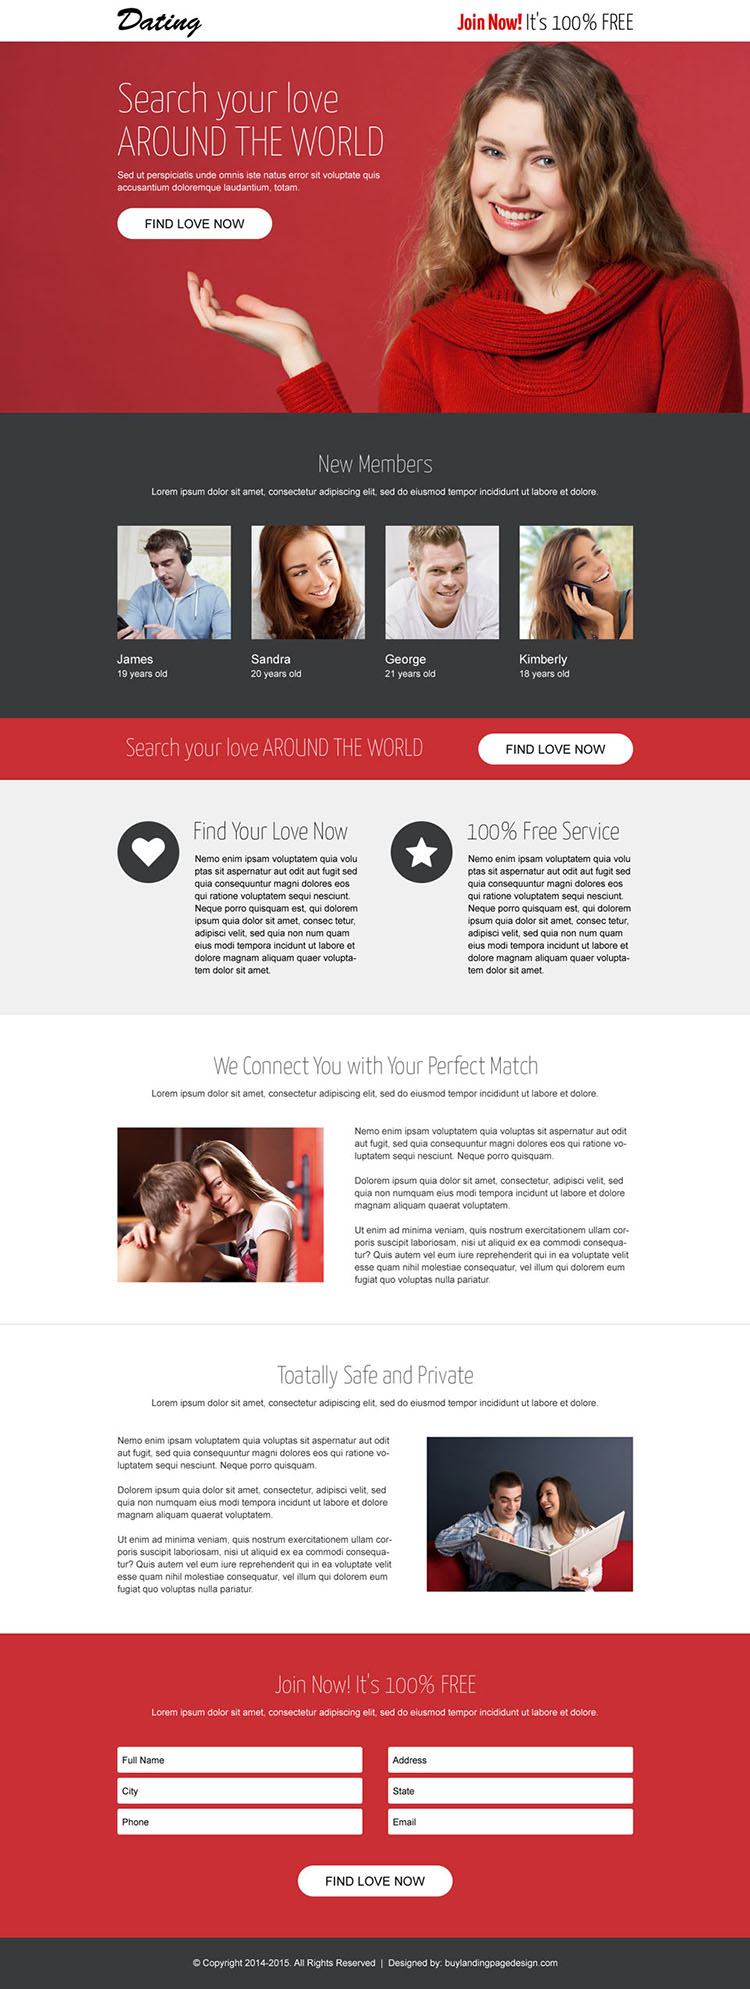 find love now lead capture dating landing page design